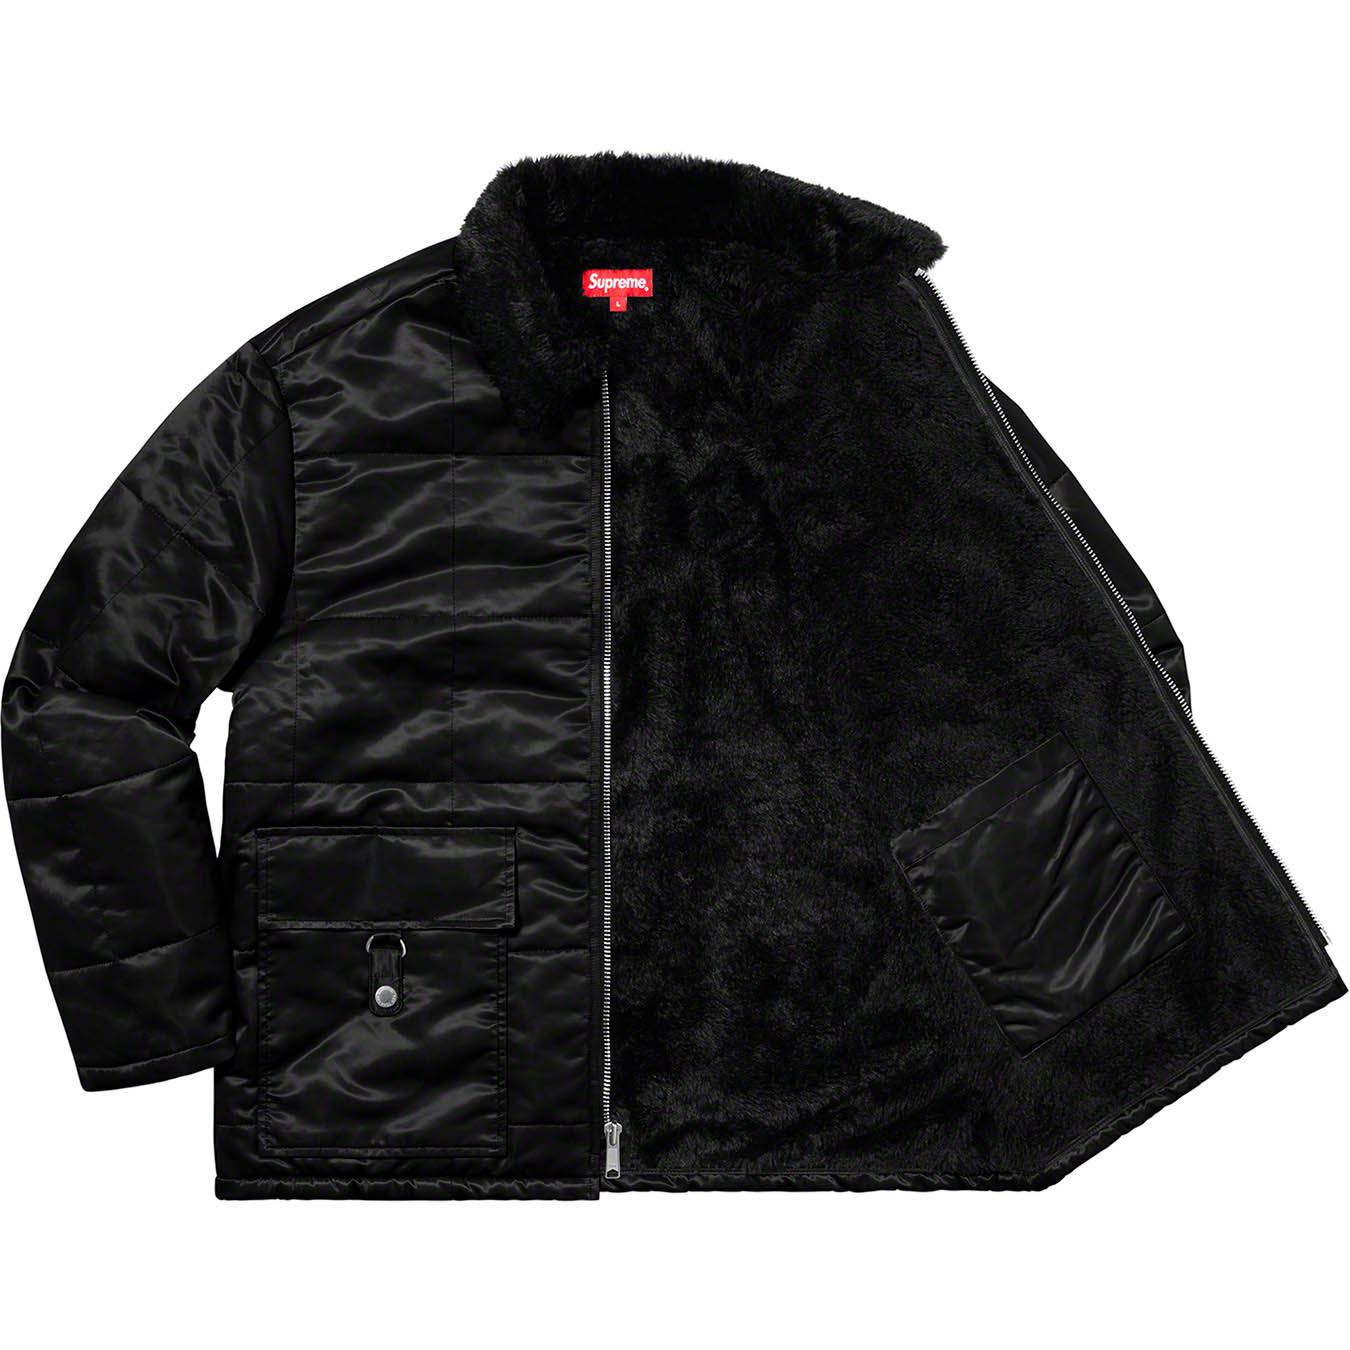 Supreme Quilted Cordura® Lined Jacket